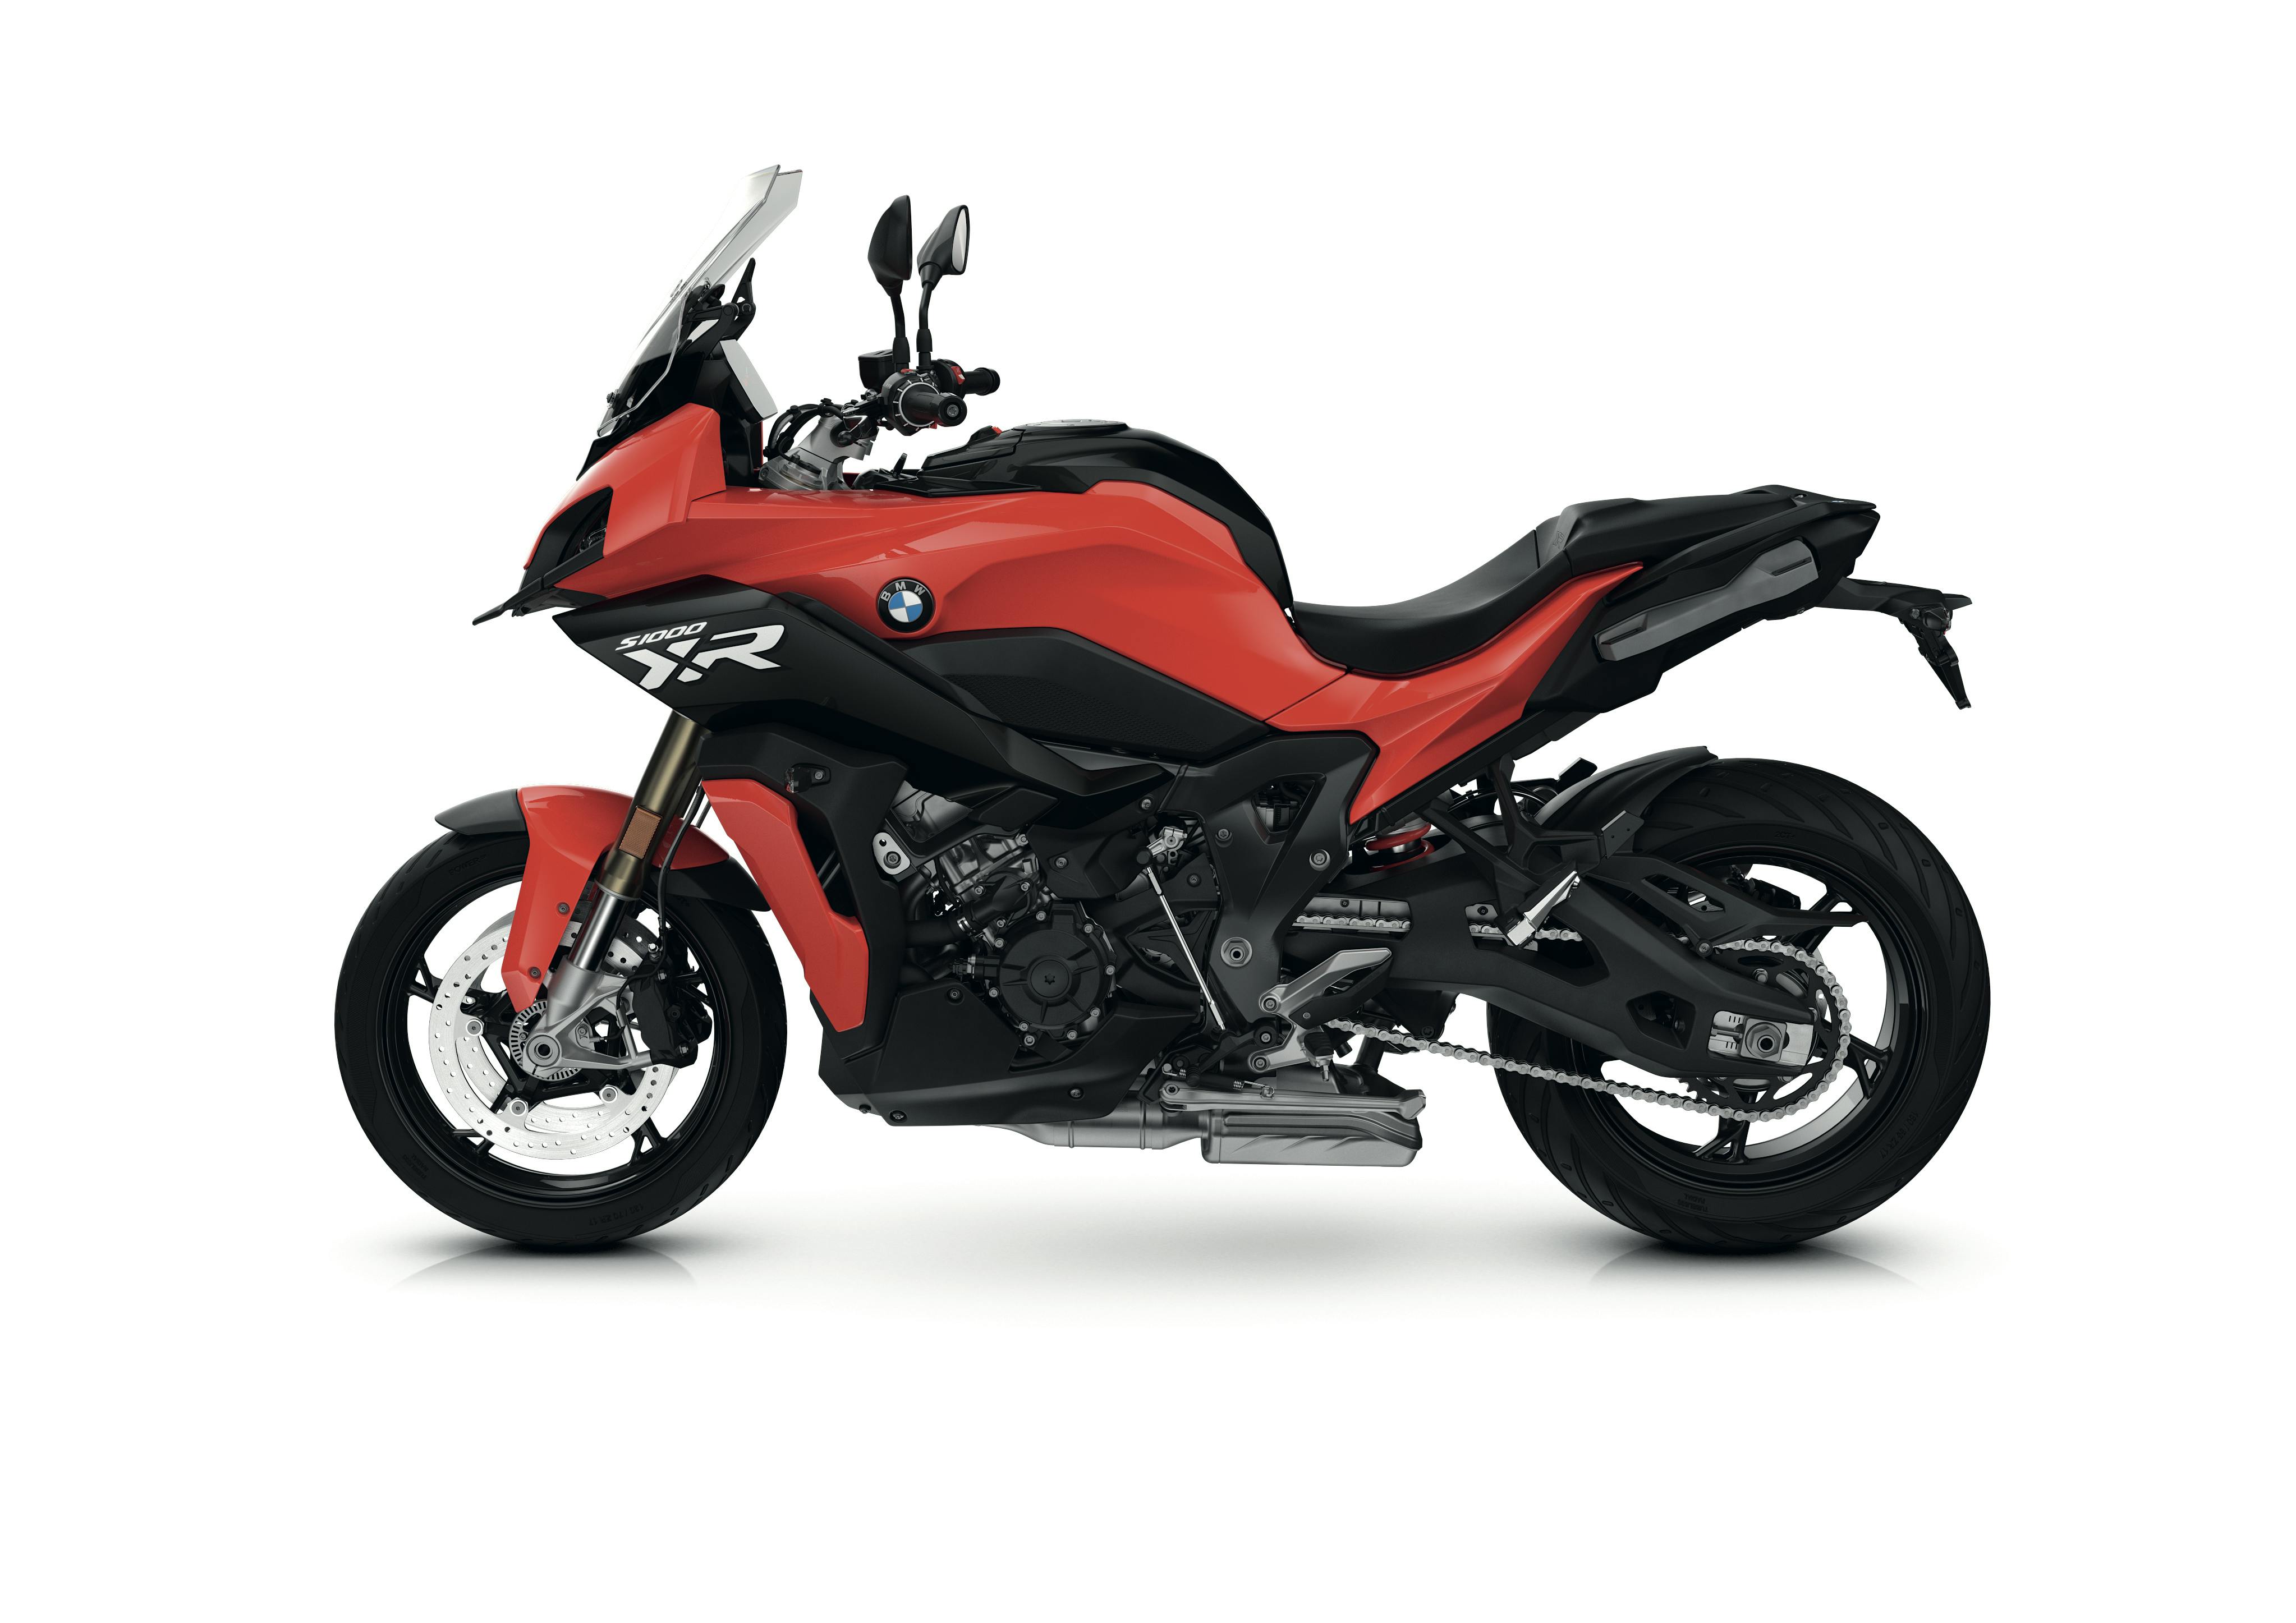 BMW S 1000 XR in Racing Red colour